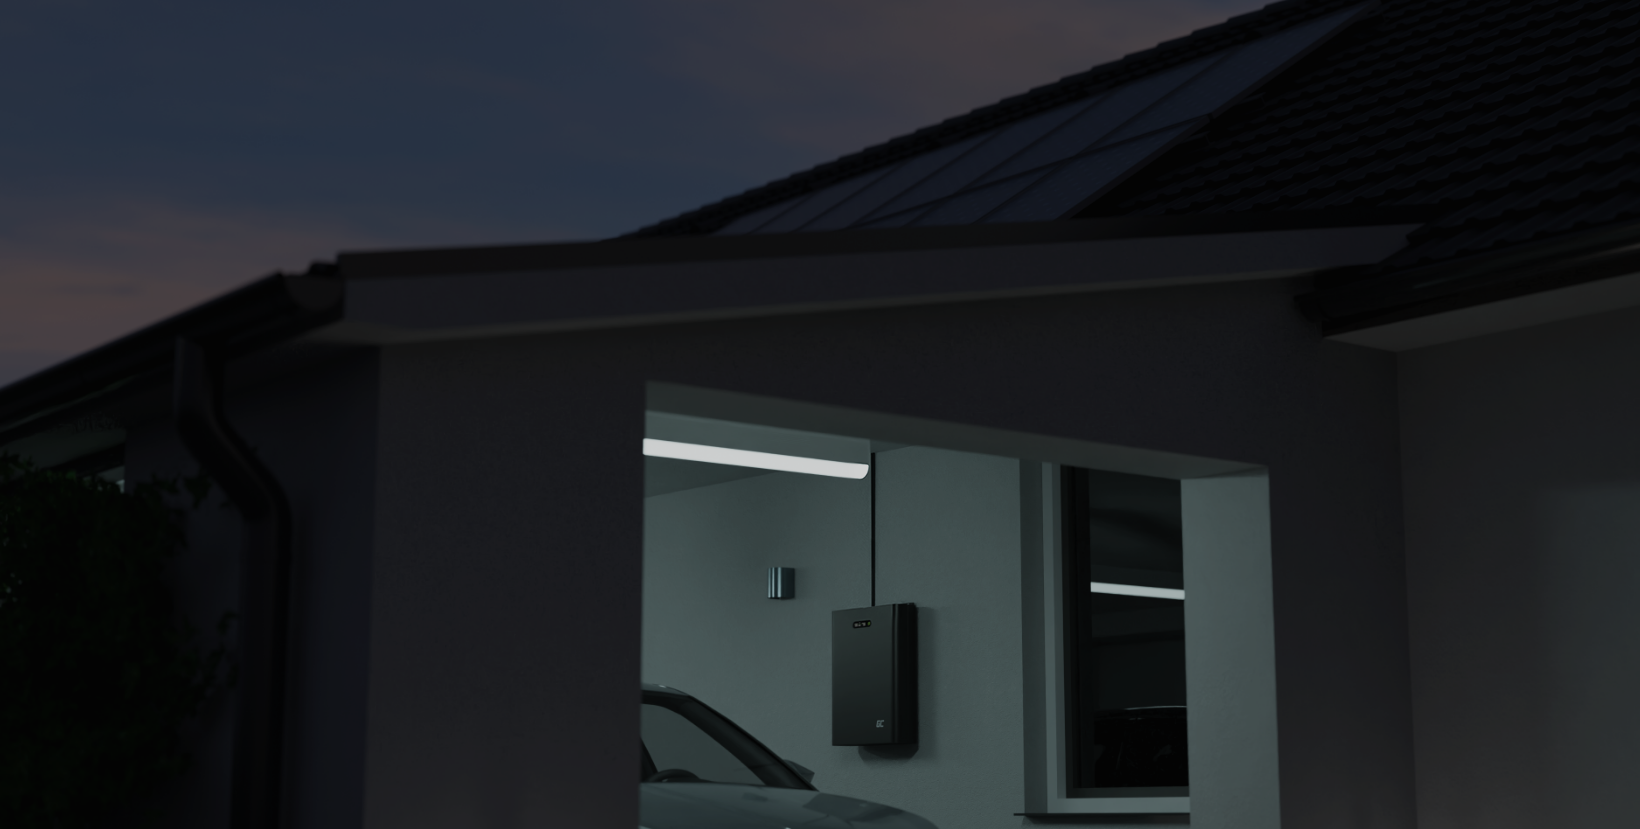 PowerNest and car in garage